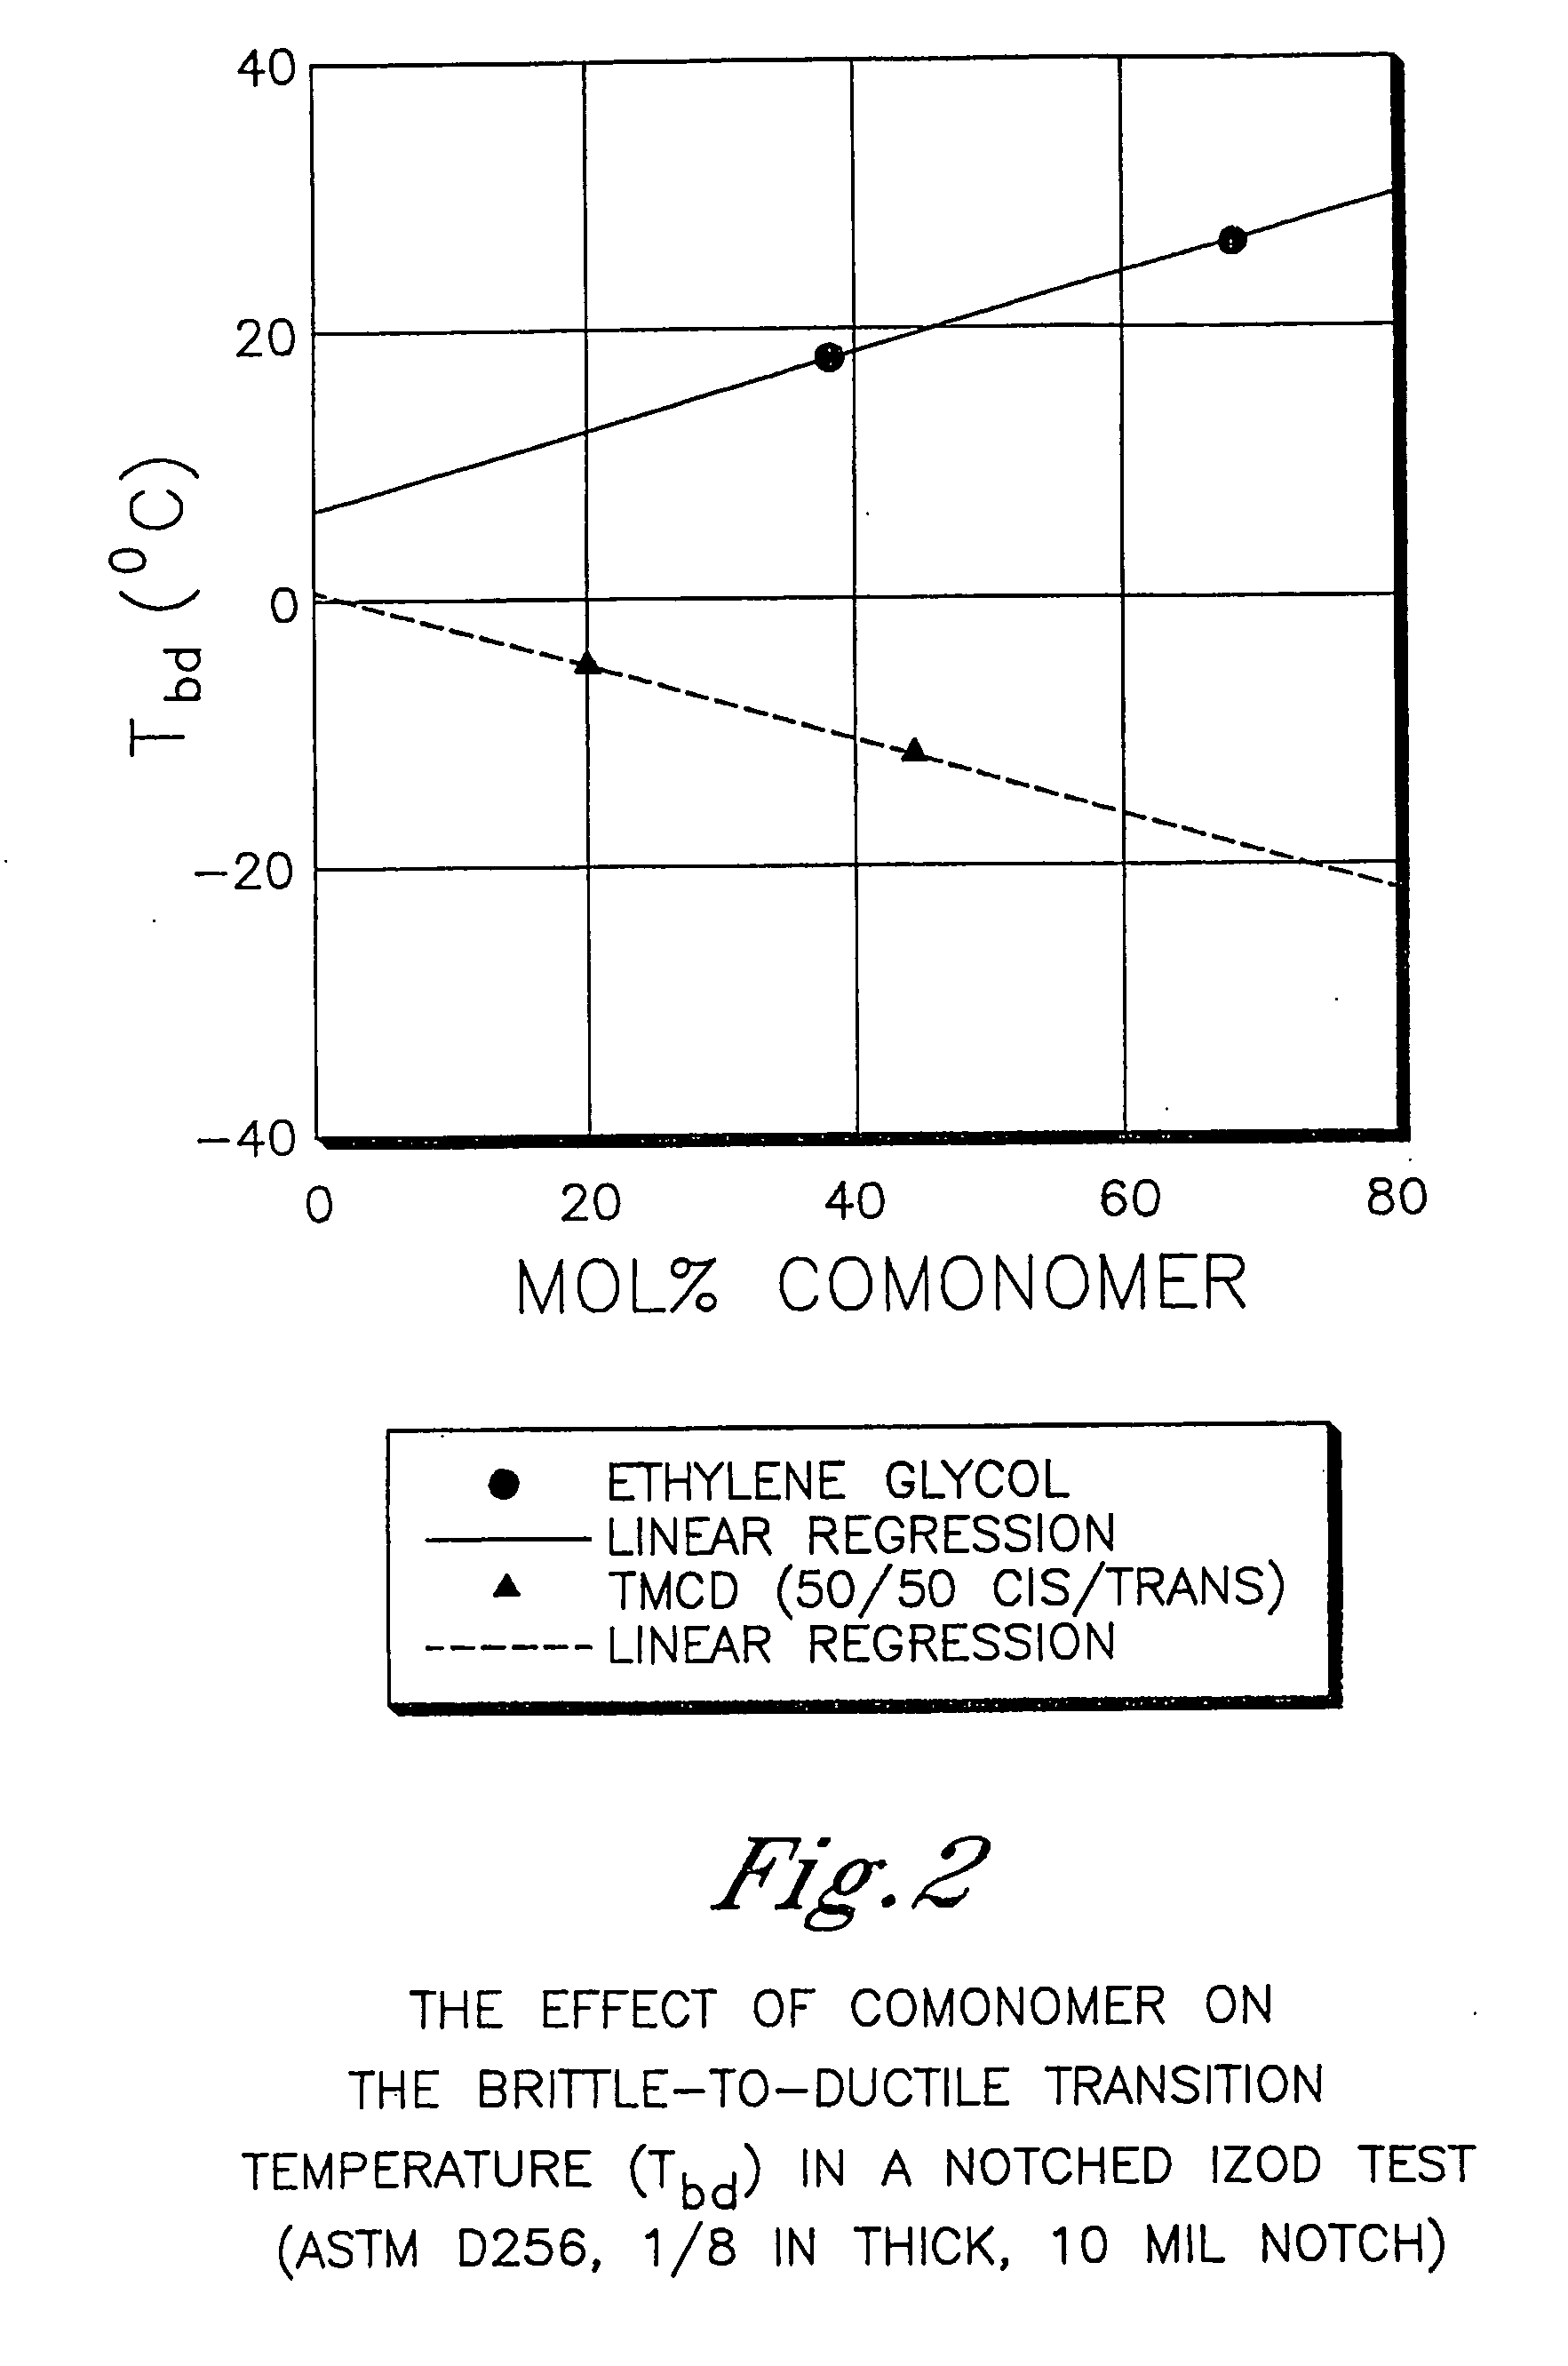 Point of purchase displays comprising polyester compositions formed from 2,2,4,4-tetramethyl-1,3-cyclobutanediol and 1,4-cyclohexanedimethanol